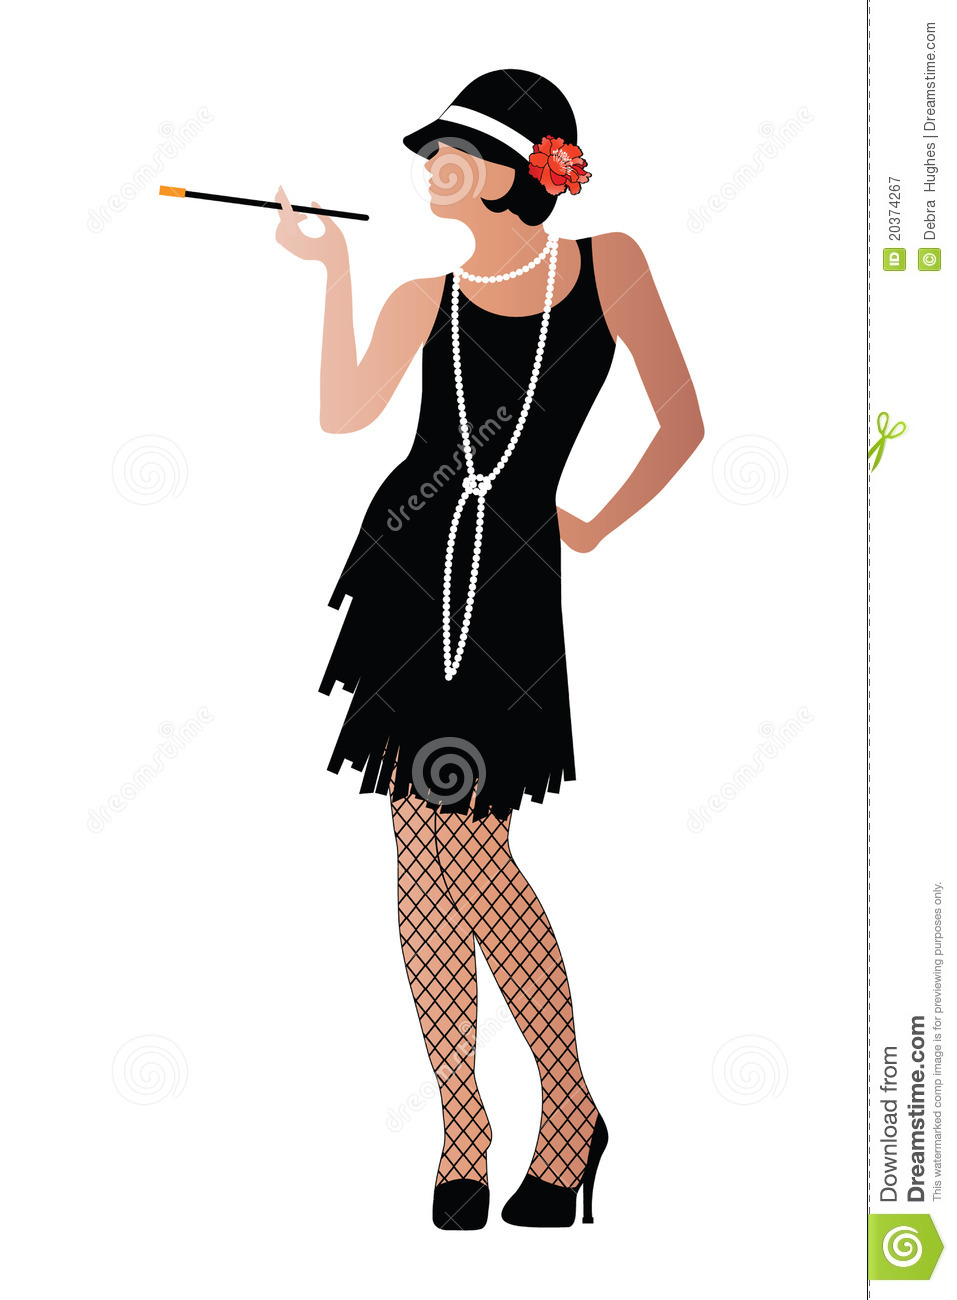 Flapper With Cigaratte And Fishnet Stockings Royalty Free Stock